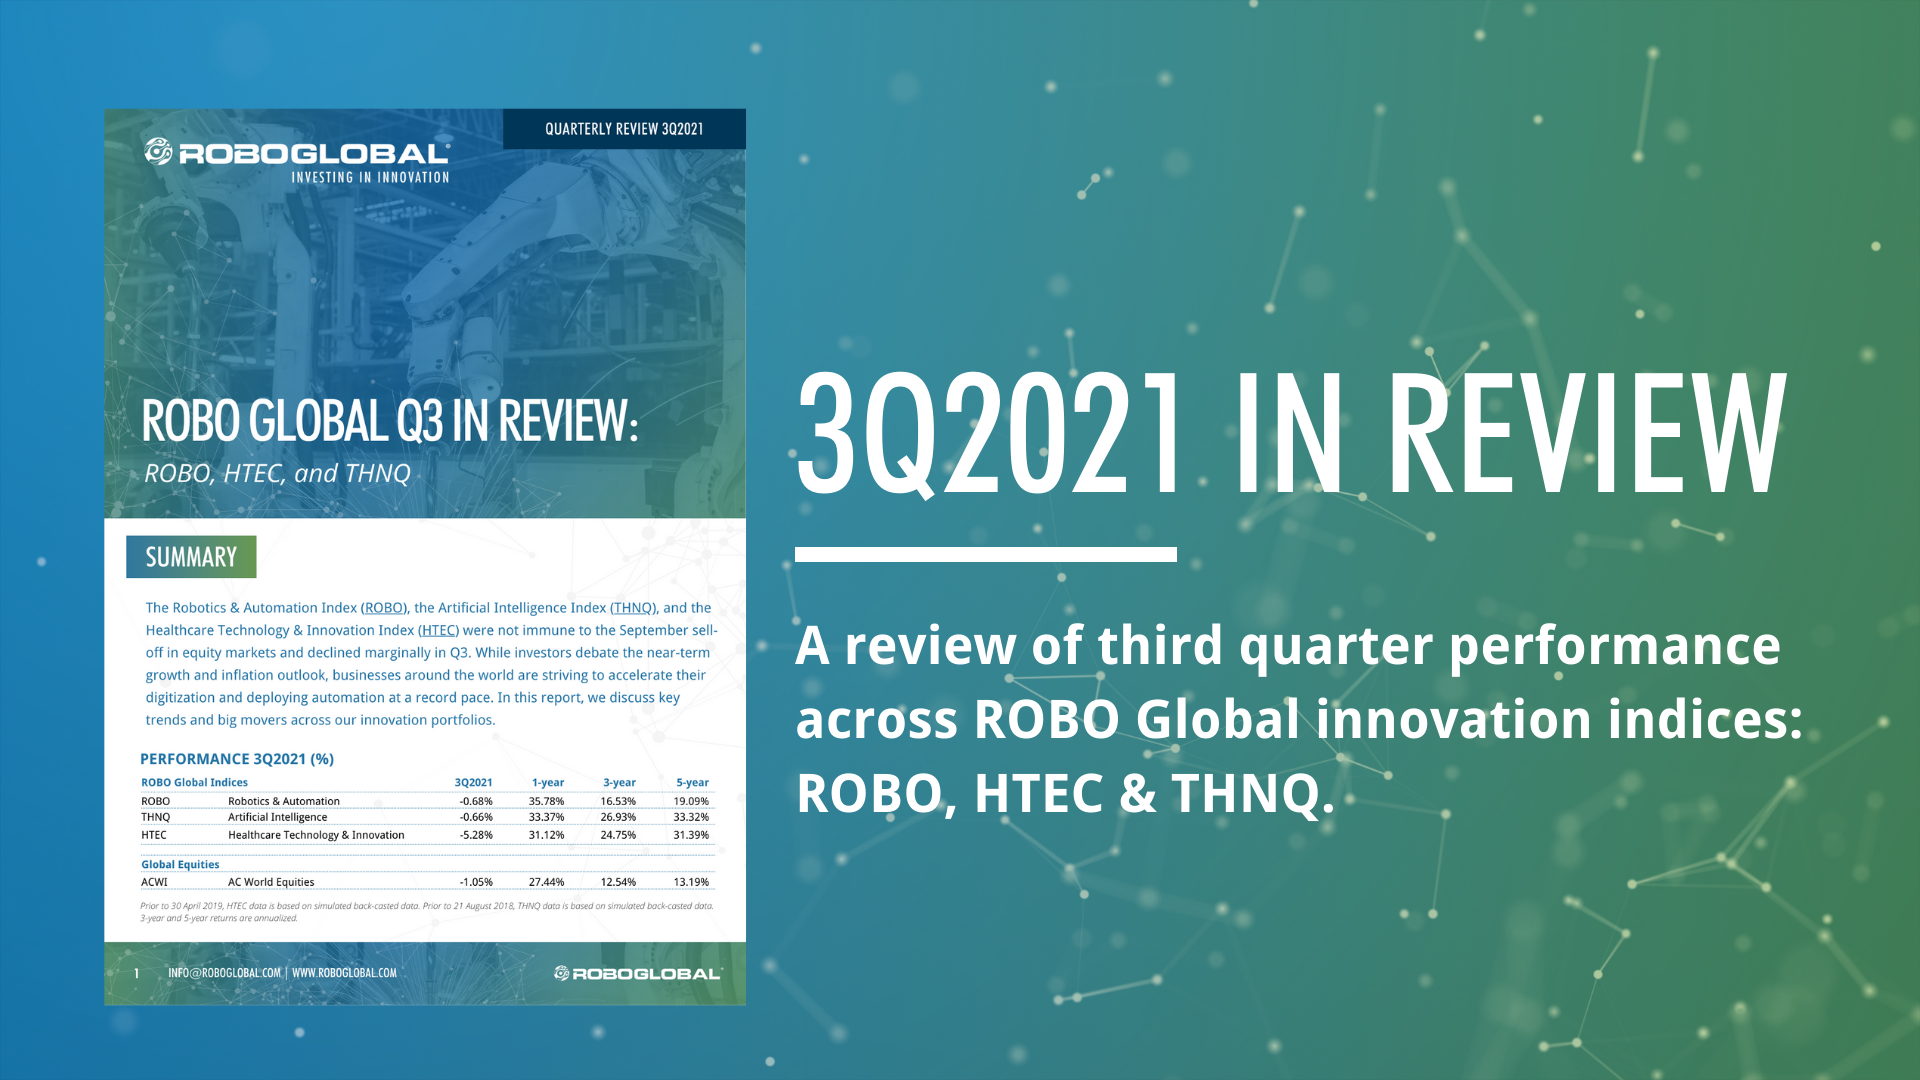 Q3 2021 In Review: ROBO Global Innovation Indices